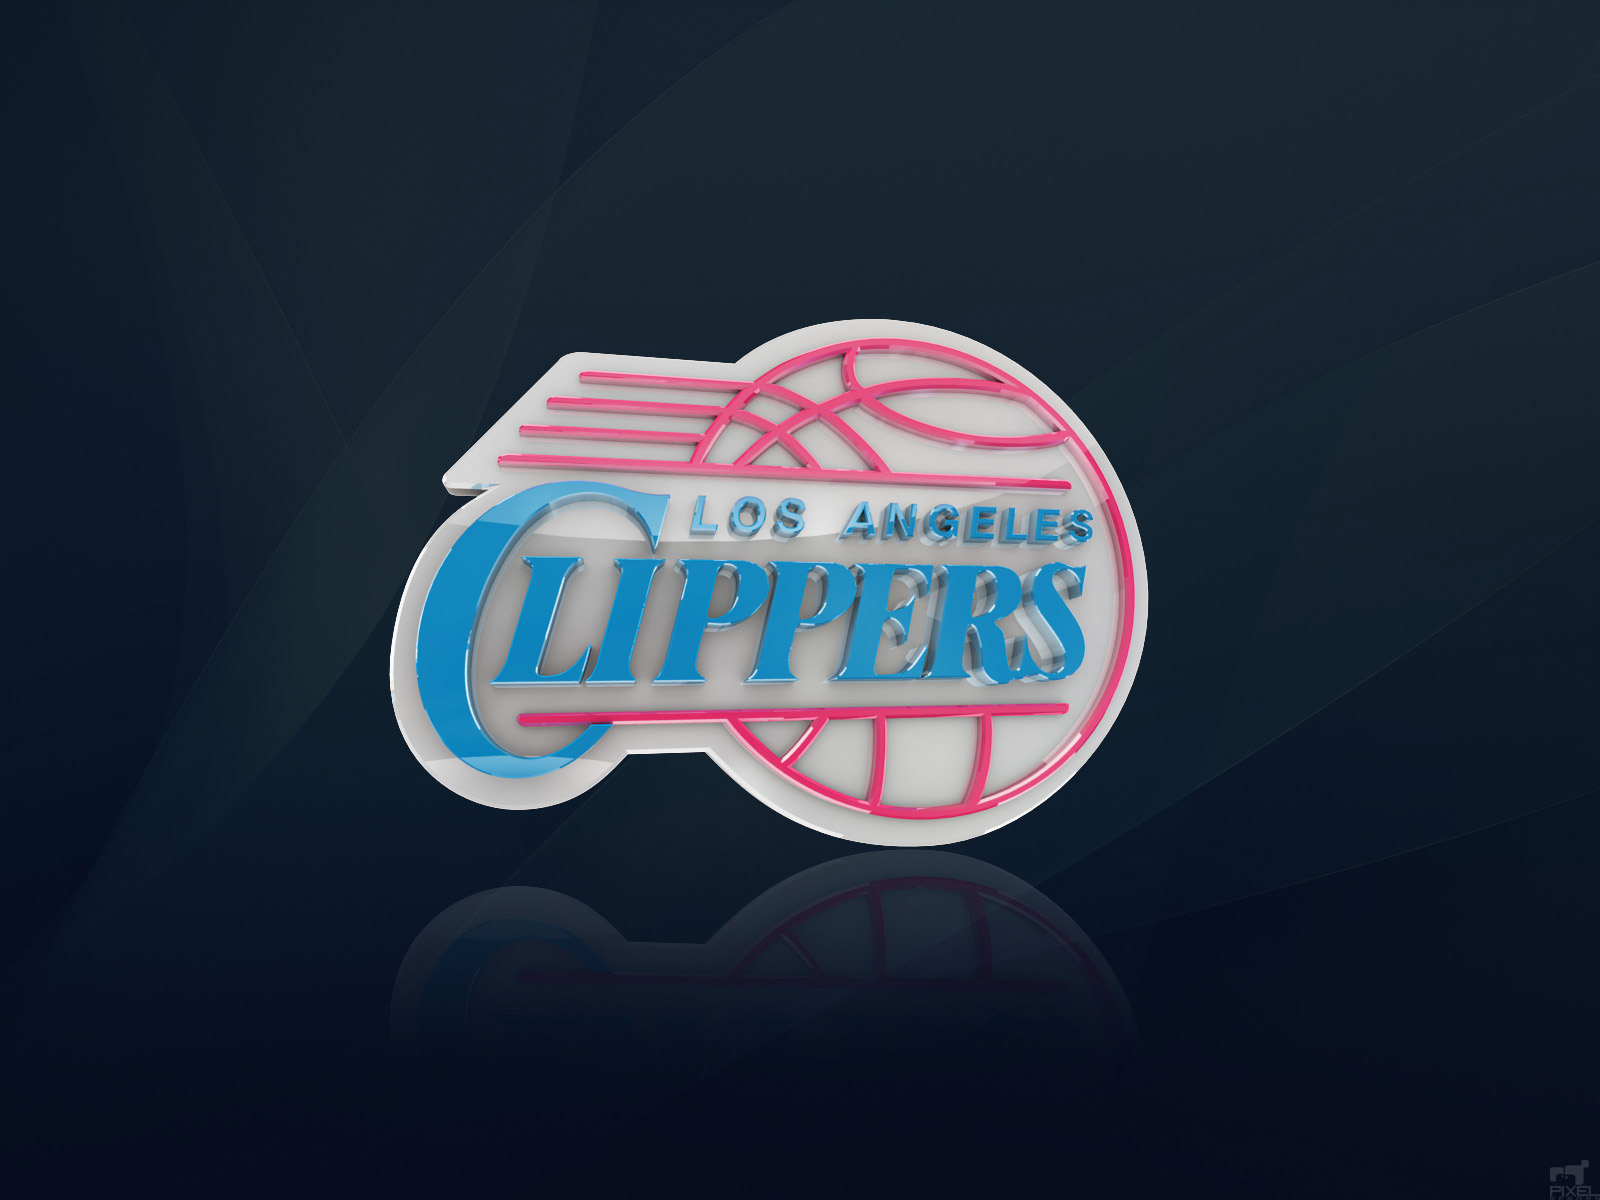 Heres the first wallpaper of LA CLIPPERS on site, also made by Pixel ...